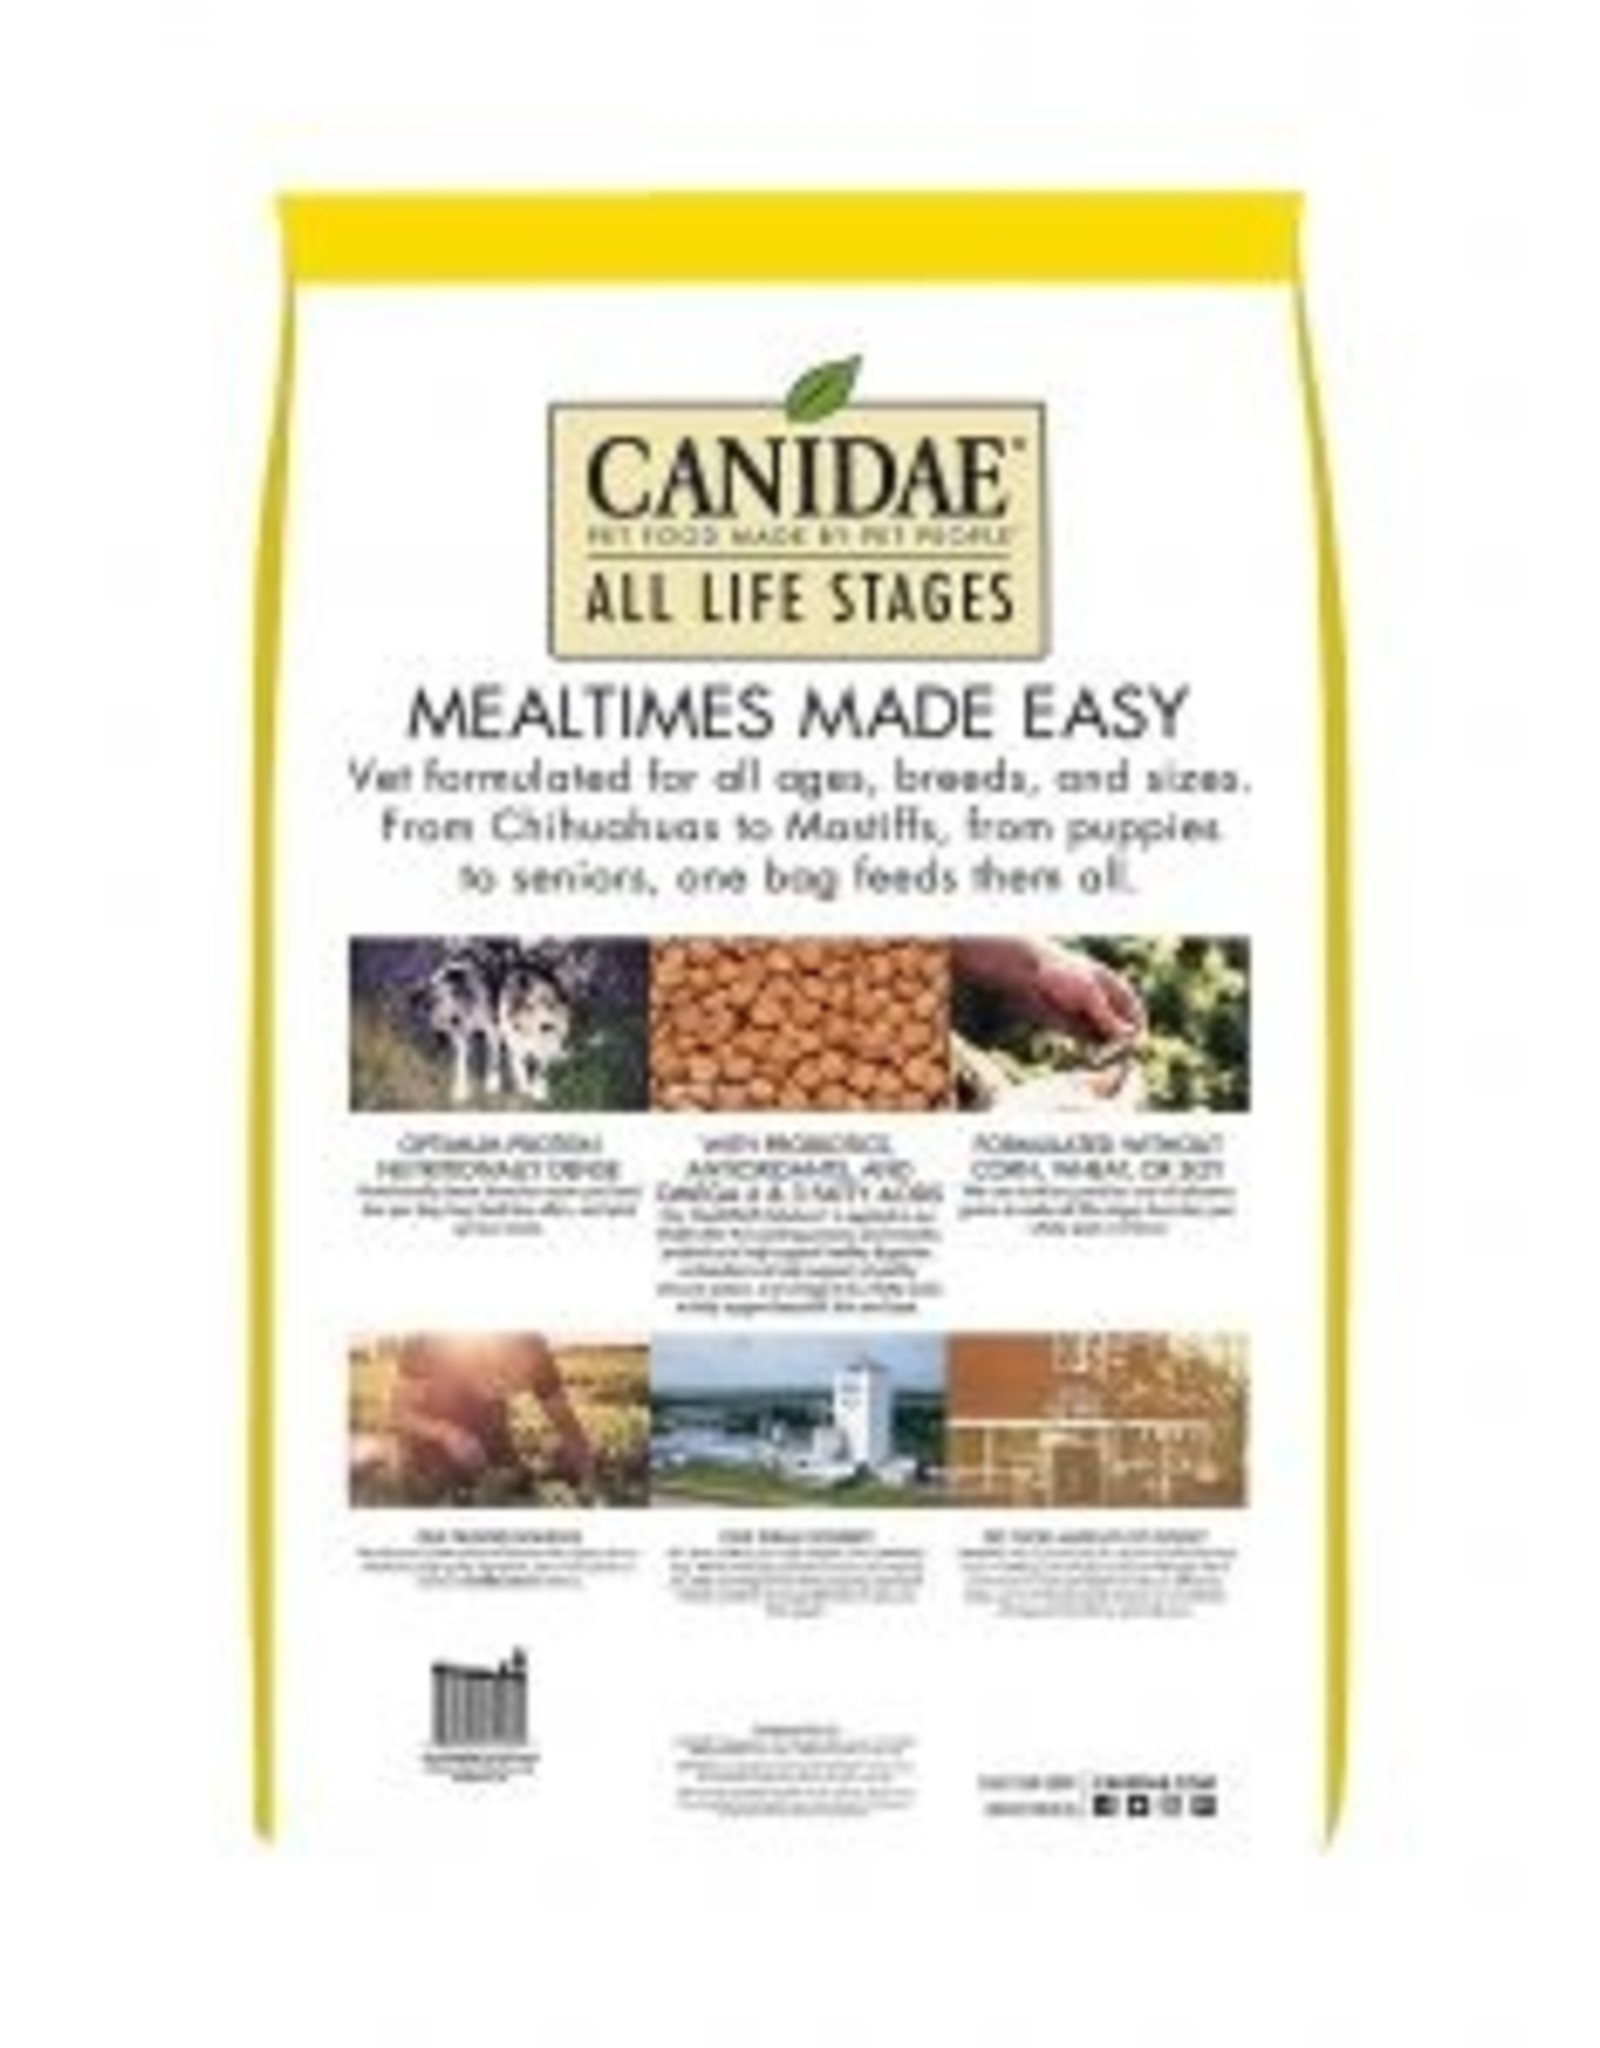 CANIDAE PET FOODS CANIDAE DOG CHICKEN & RICE 30LBS